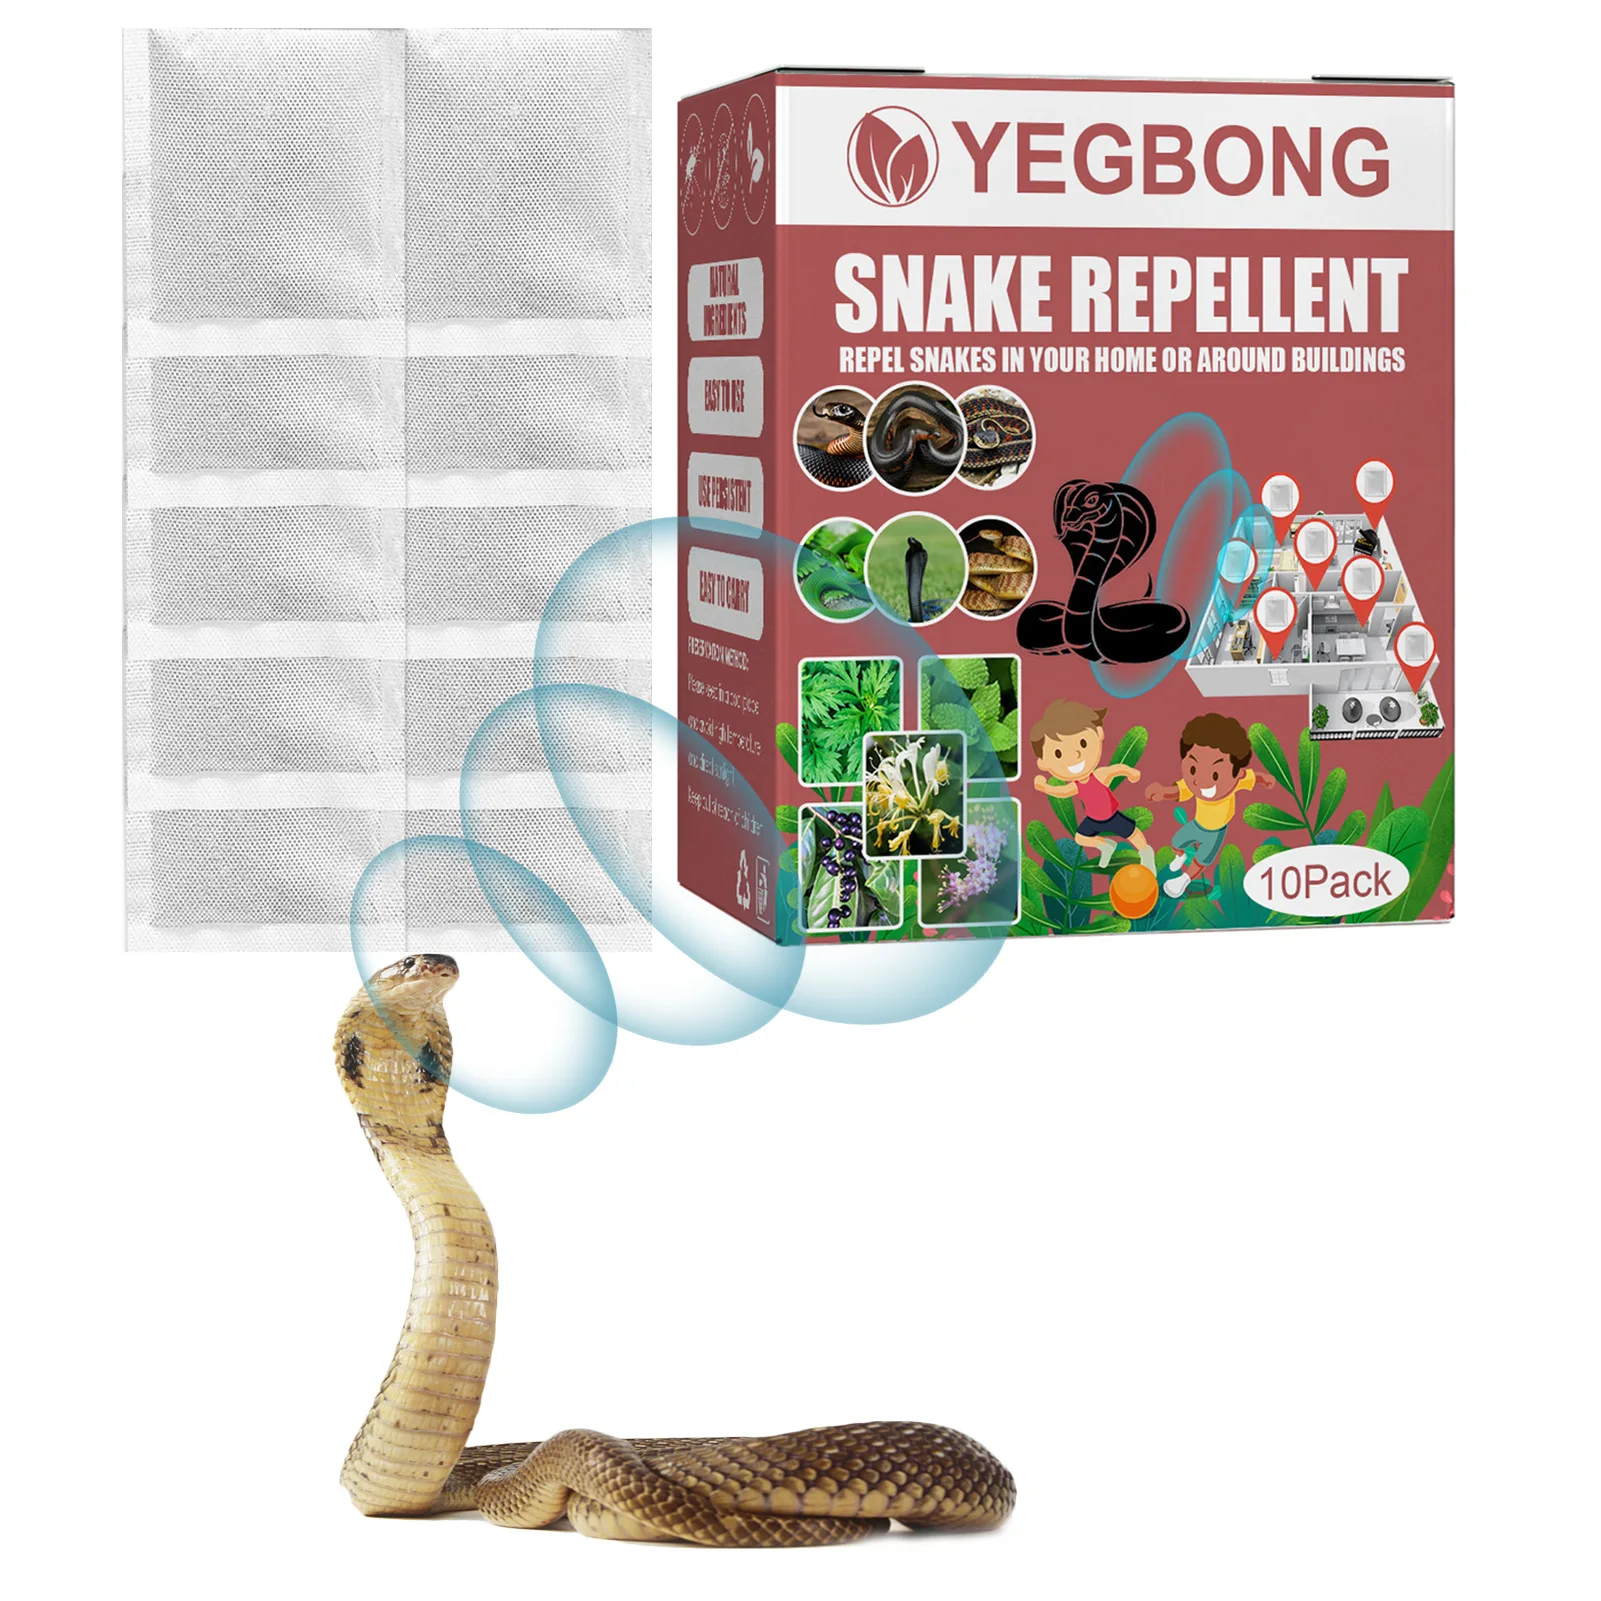 

Snake Repellents Pet Safe Snake Repellents For Outdoors Snake Away Repellents For Outdoors Yard Lawn Garden Camping Fishing And